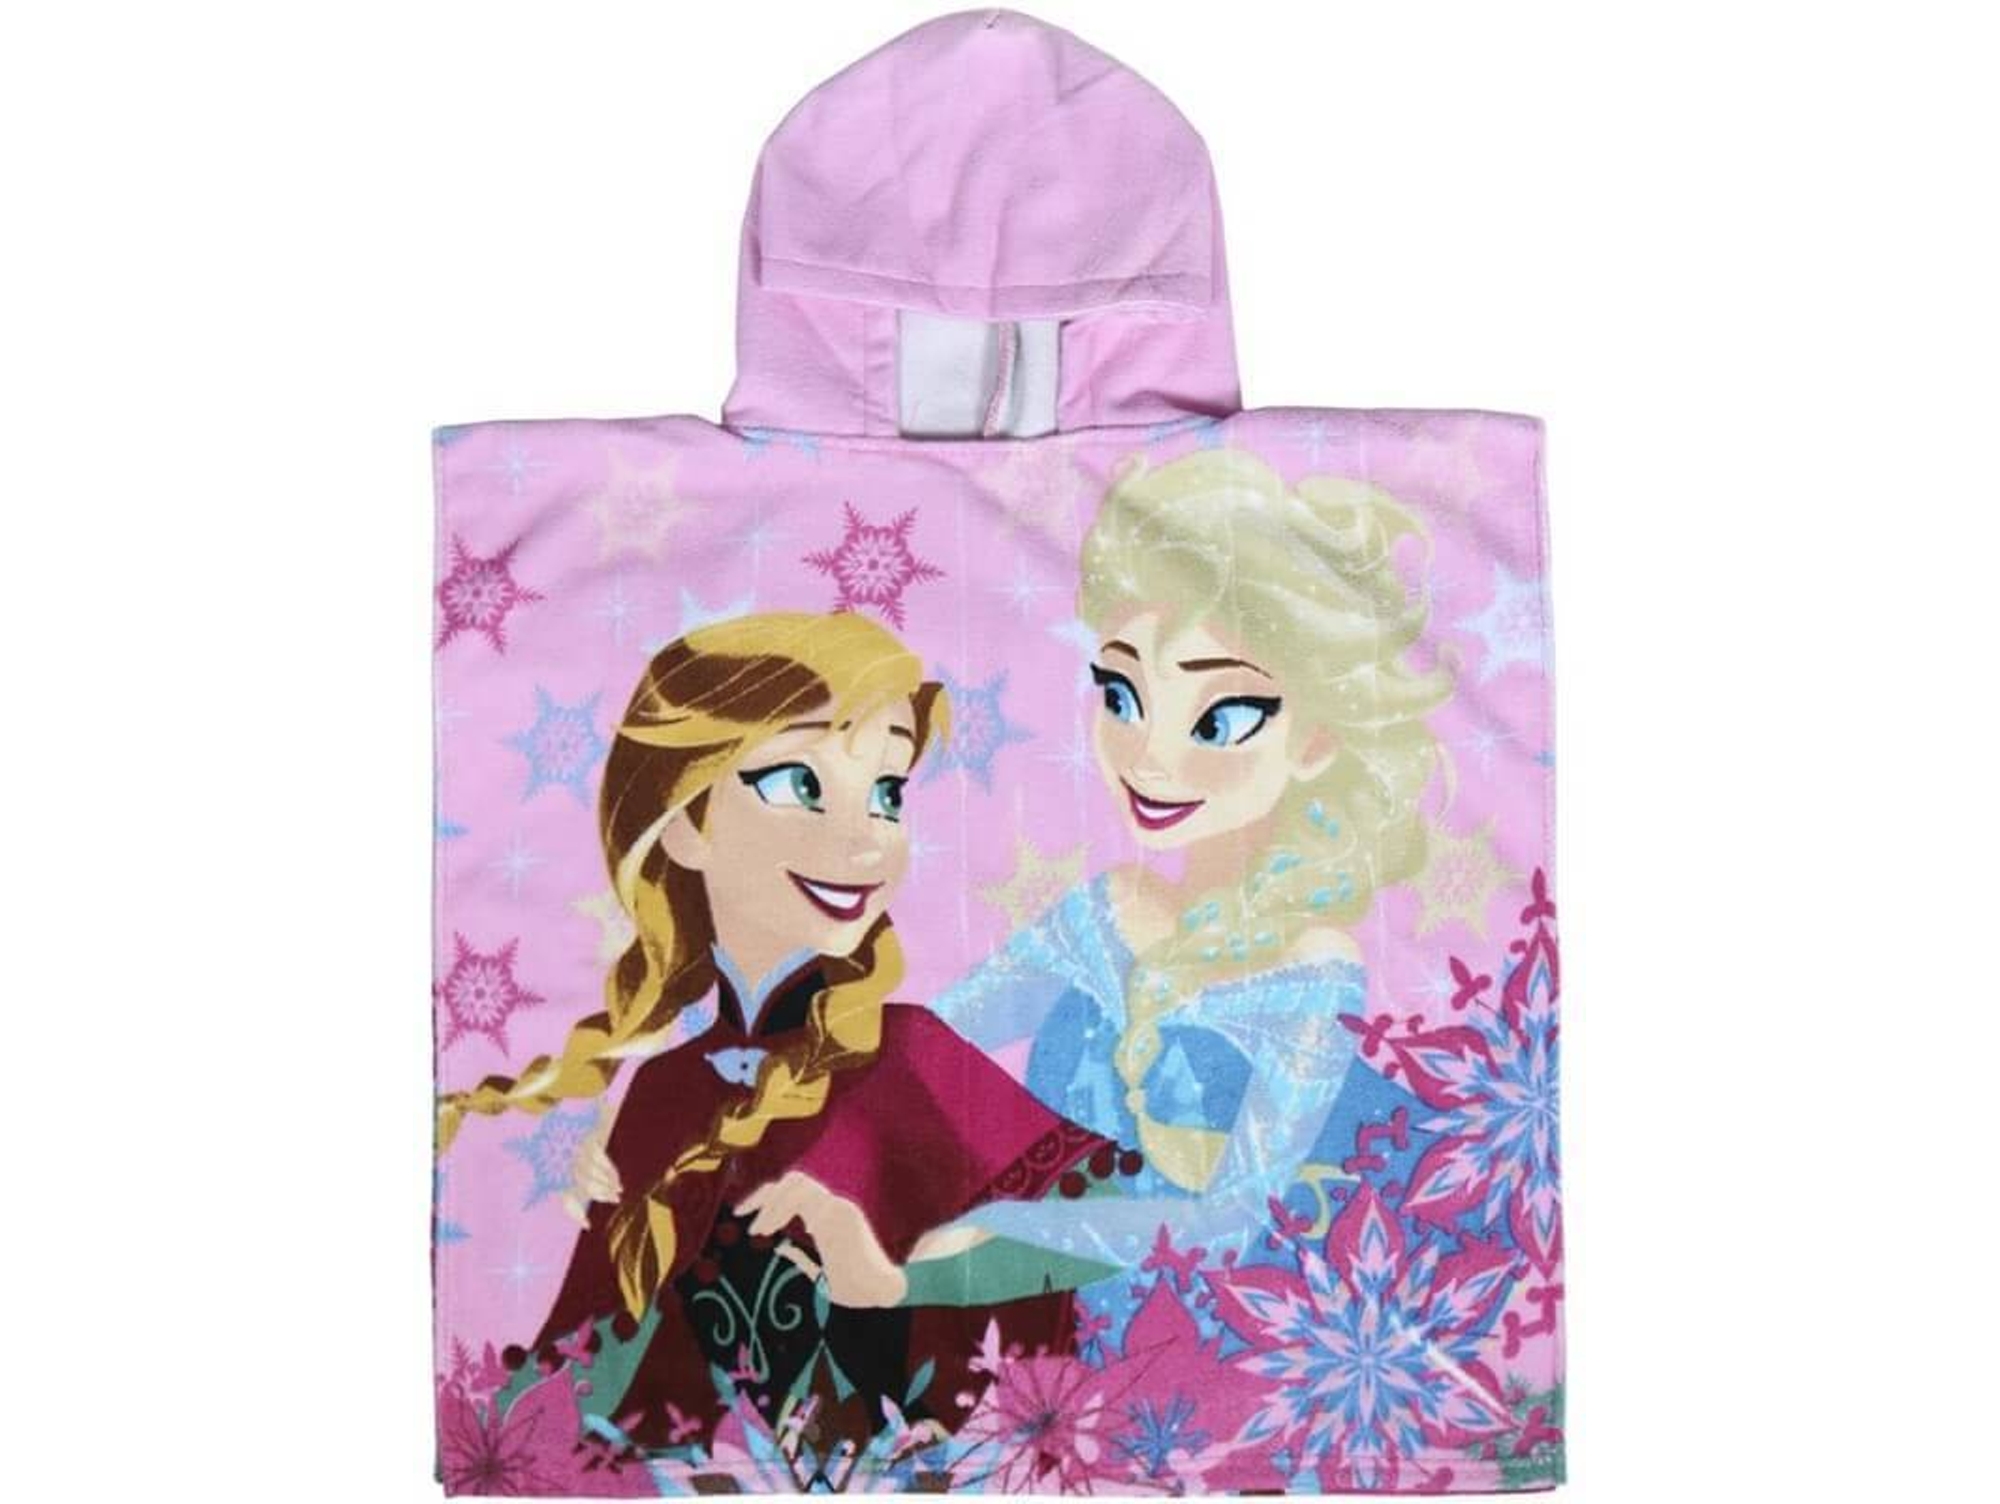 Cerda Disney Frozen Pink Hooded Poncho Towel 60 x 120cm RRP £11.99 CLEARANCE XL £2.99 or 2 for £5